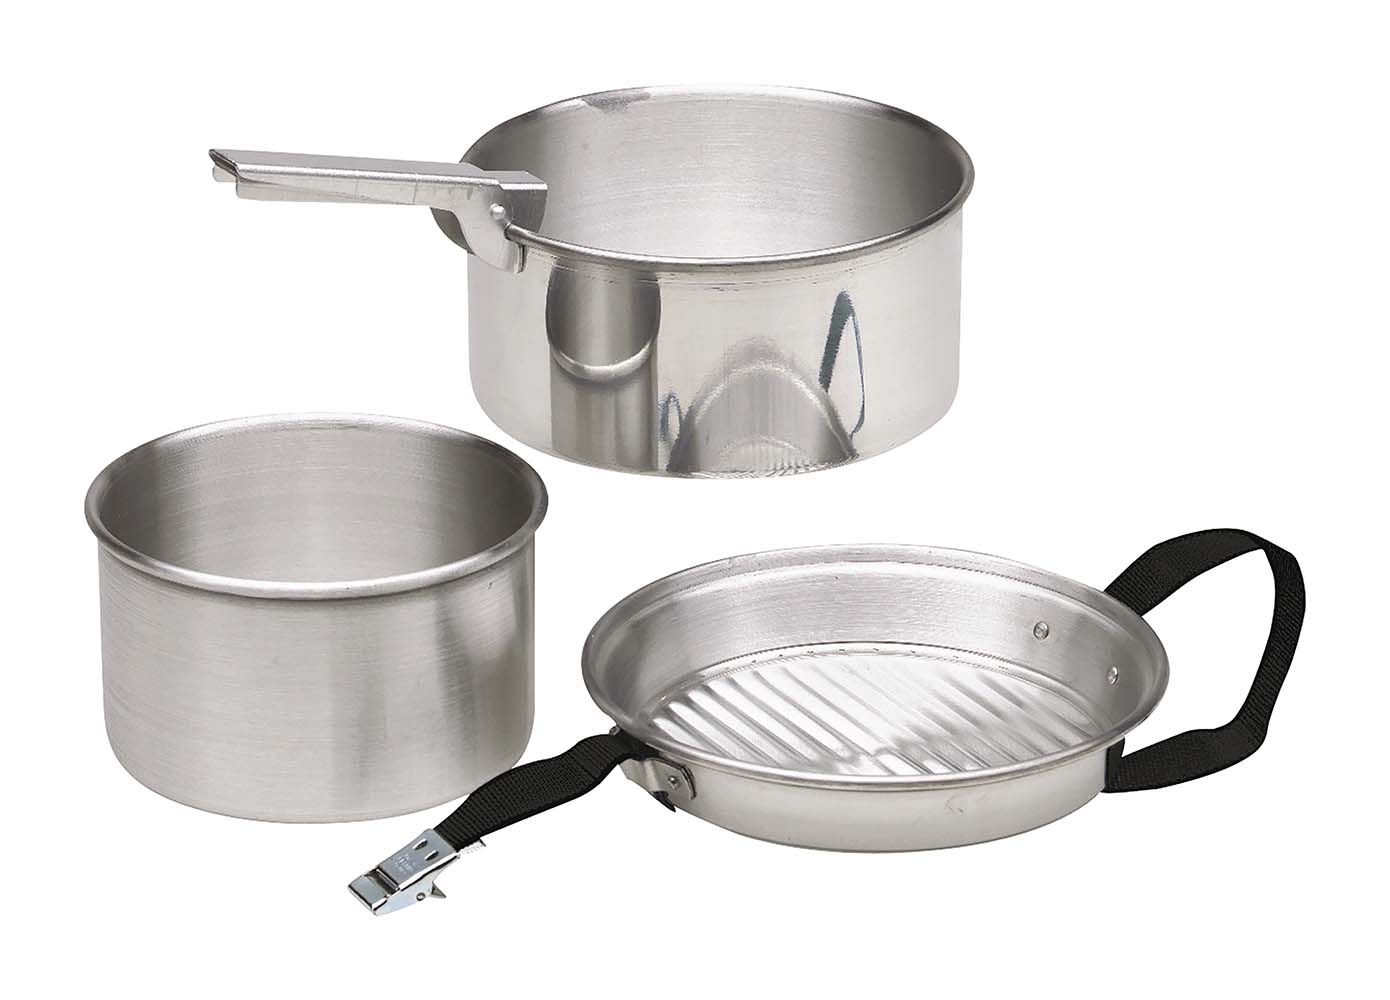 2200100 Complete 4-part light weight cookware set. This pan set is made from aluminium and is therefore lightweight. These aluminium pans can be used on gas, ceramic and electrical heat sources. The set consists of 2 sauce pans, a frying pan, 2 mugs and a pot handle. The pans are fully nestable and can be attached by means of the supplied strap. Dimensions of pans (Øxh): 17x8, 14x8 and 17x3.5 cm. Dimensions nested (Øxh): 17x12 cm. Contents: 1.3 and 1.8 litre.